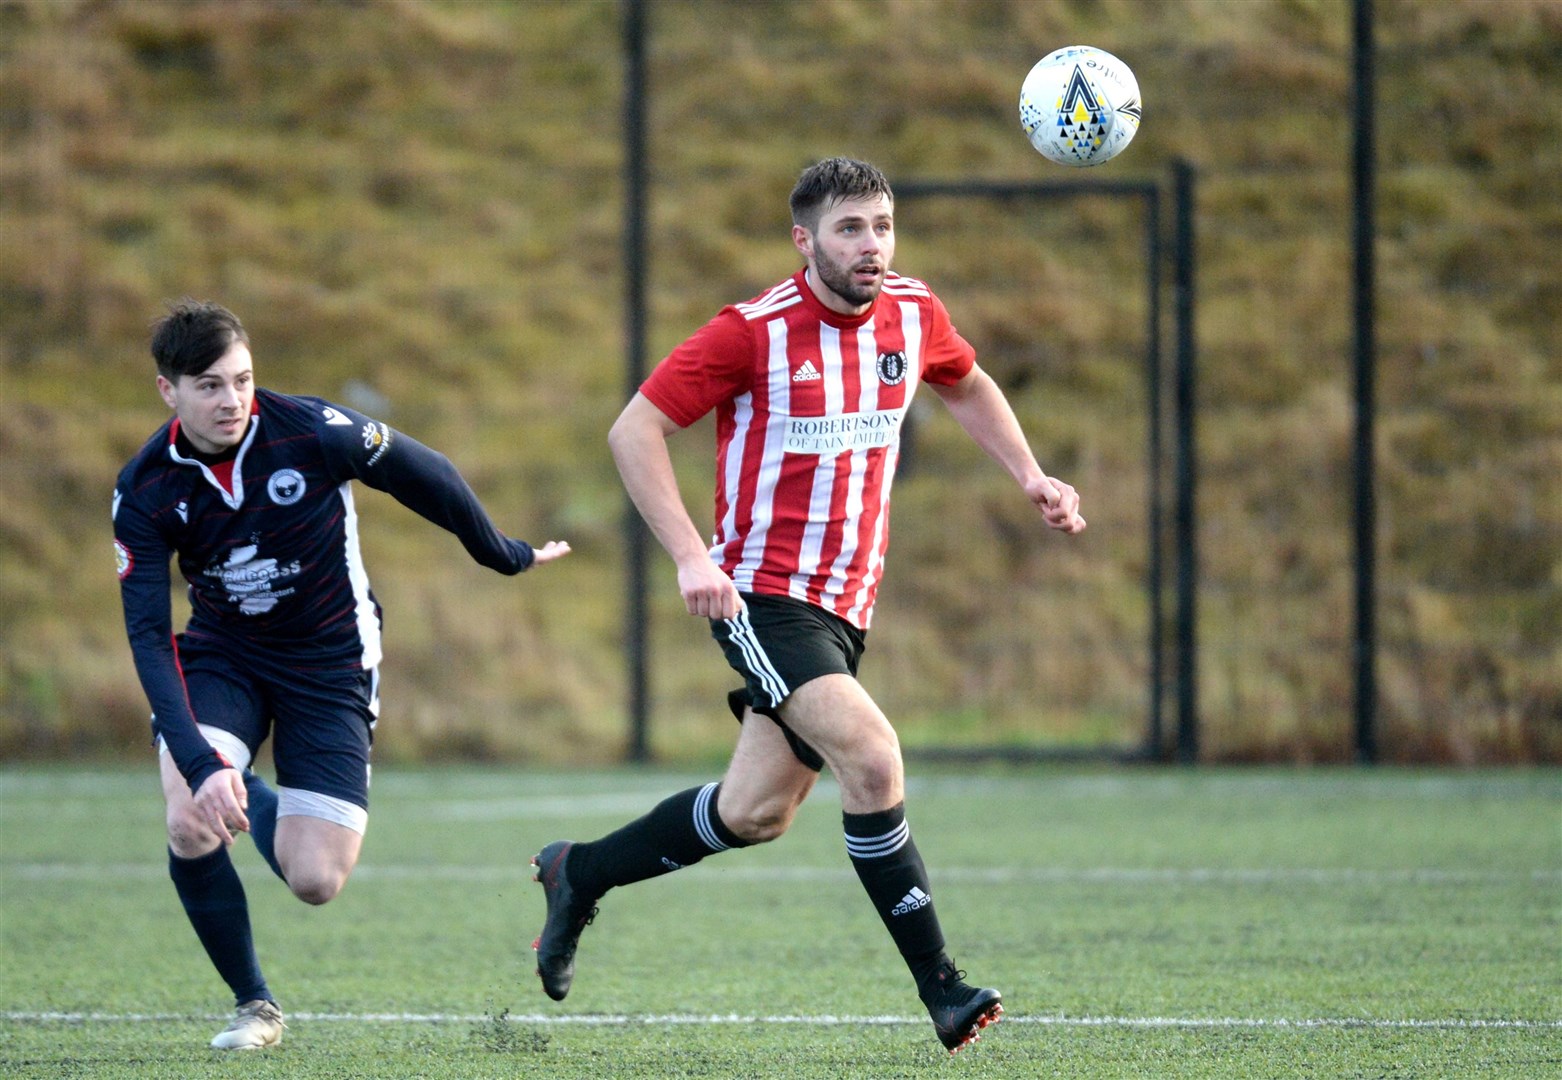 Inverness Athletic v St Duthus, North Caledonian Cup at Inverness Royal Academy: Dominic Macaulay, Inverness Athletic, chasing Gary James Millard, St Duthus. Picture: James Mackenzie.